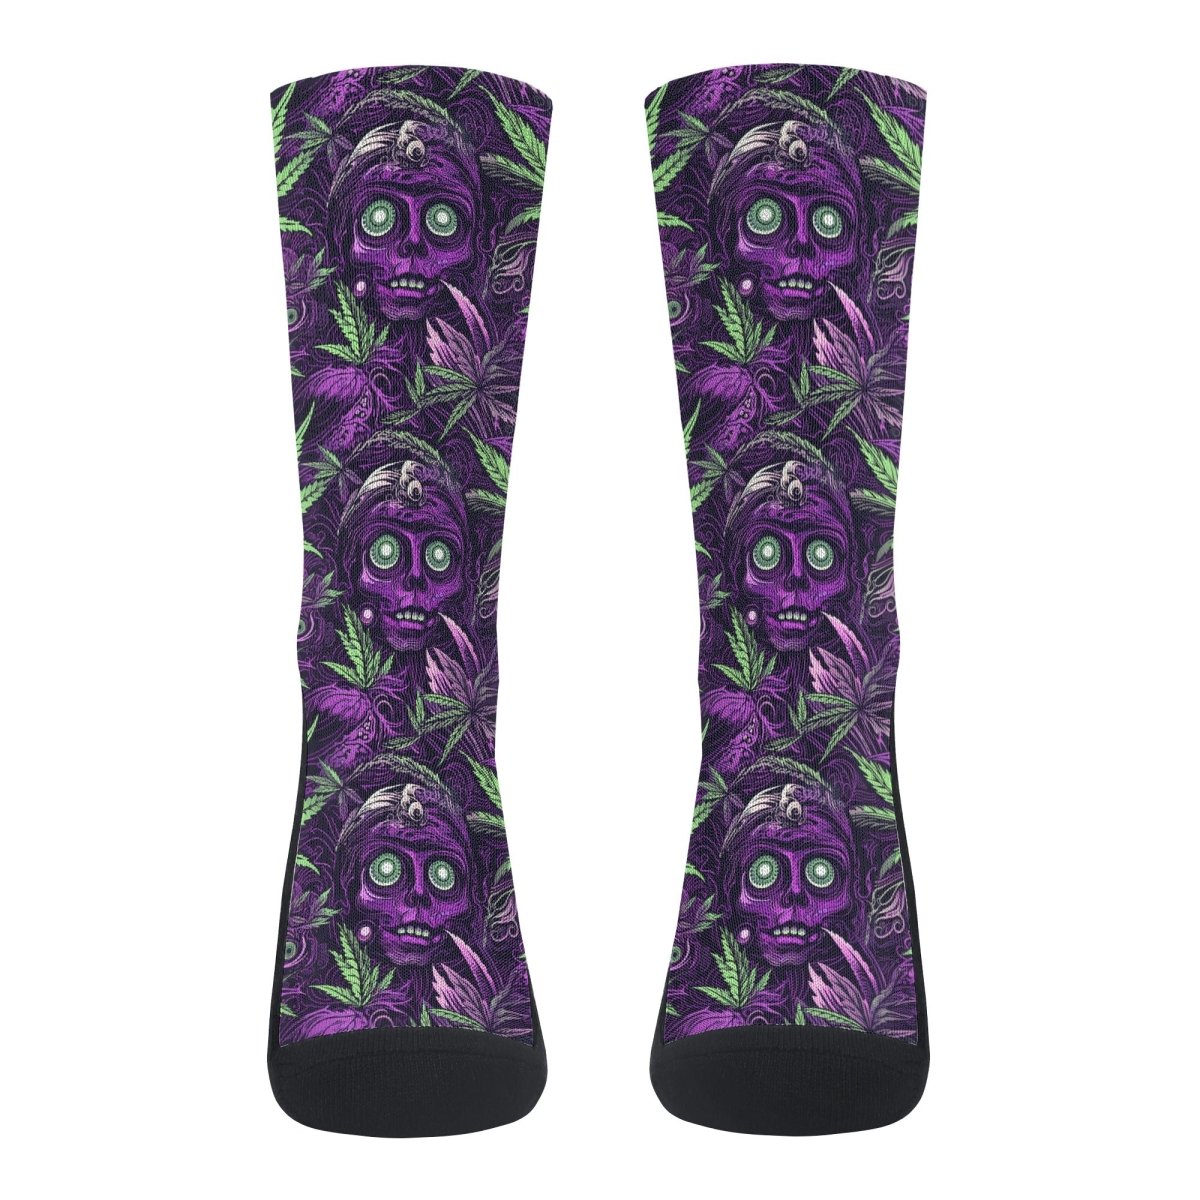 Leaves & Creature Socks - Mainly High